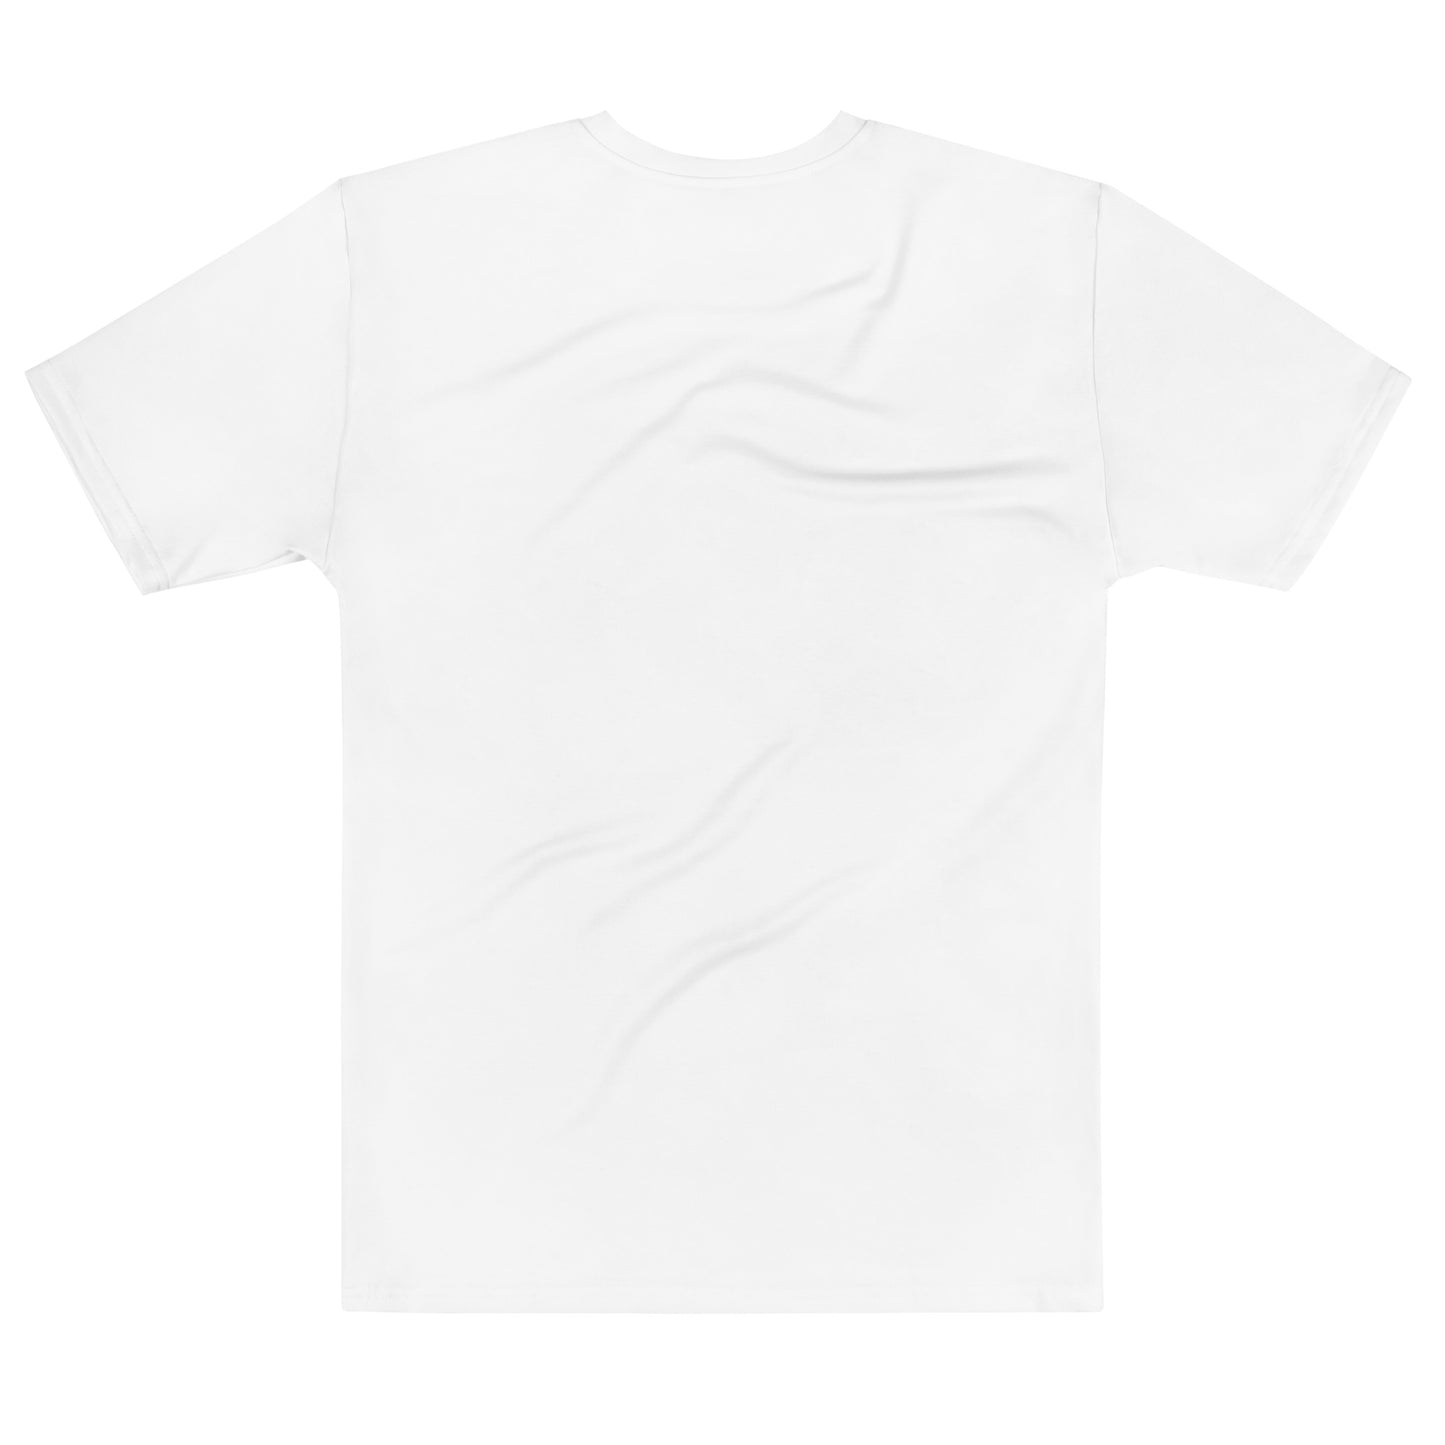 Cooee - Sustainably Made Men's Short Sleeve Tee